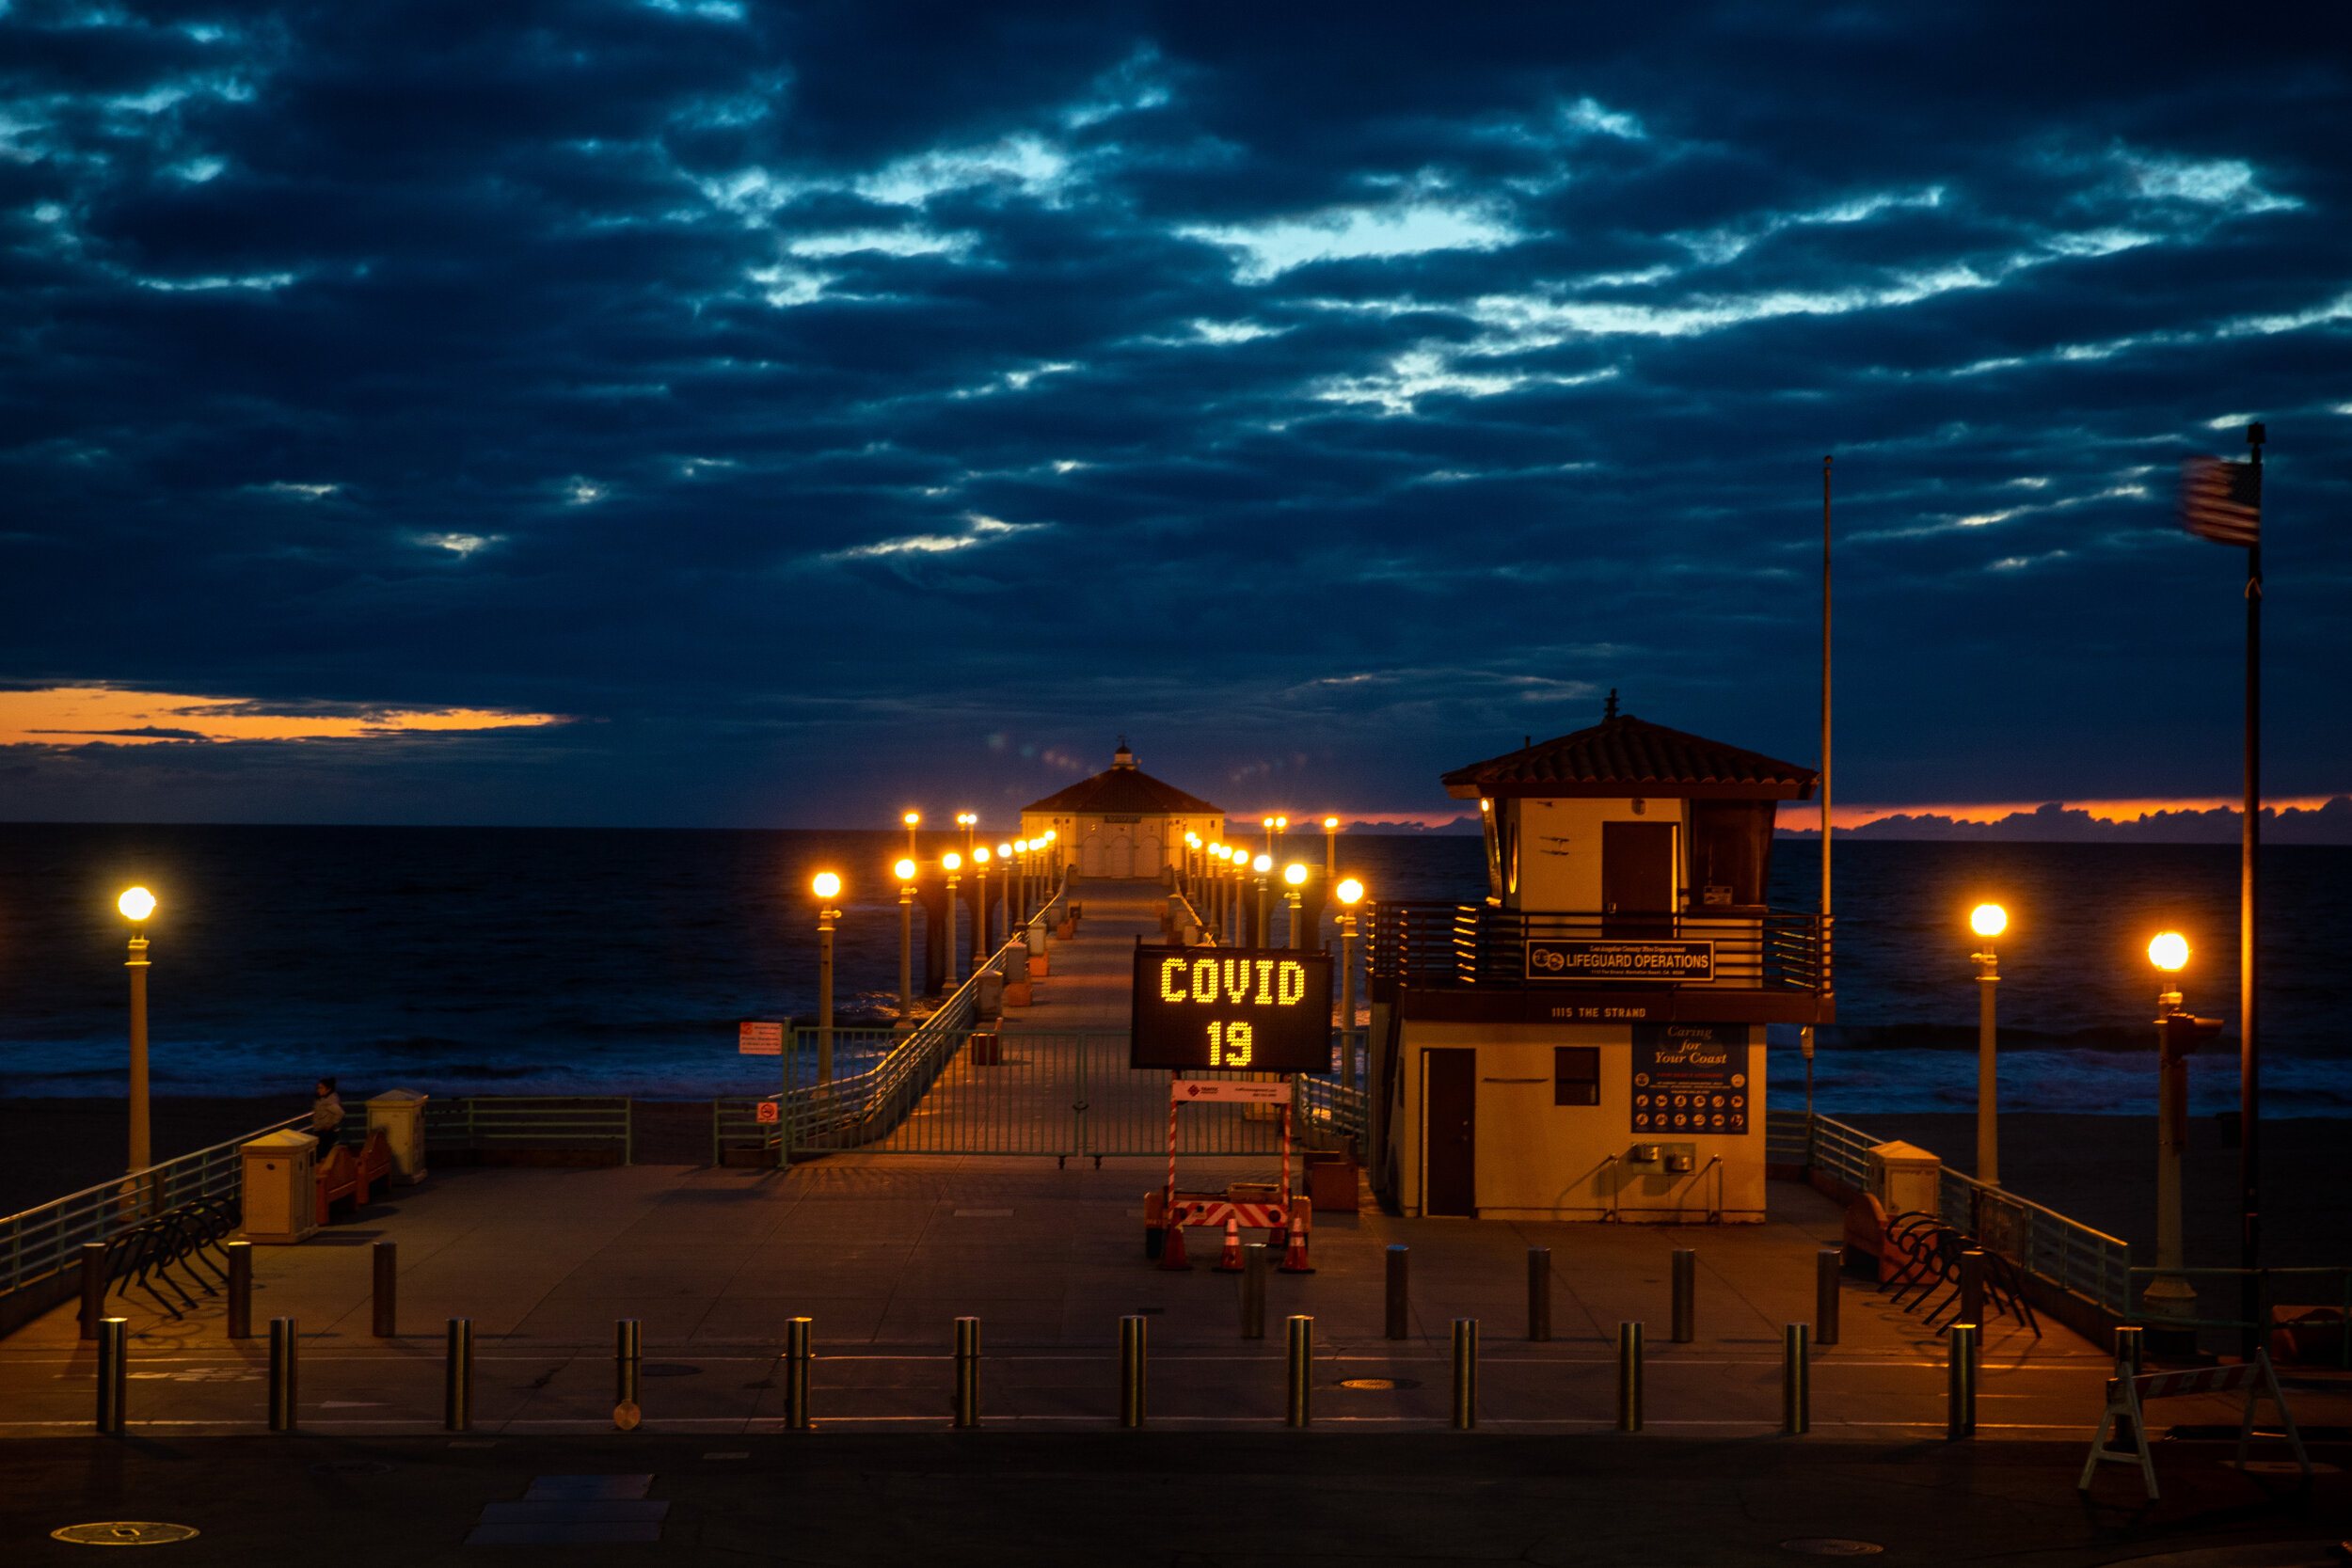  The Manhattan Beach, CA, Pier is gated and locked and a city maintenance sign repeats the message that (parking) “LOT CLOSED,” “COVID 19” and “Social Distancing,” the evening of March 25, 2020.  